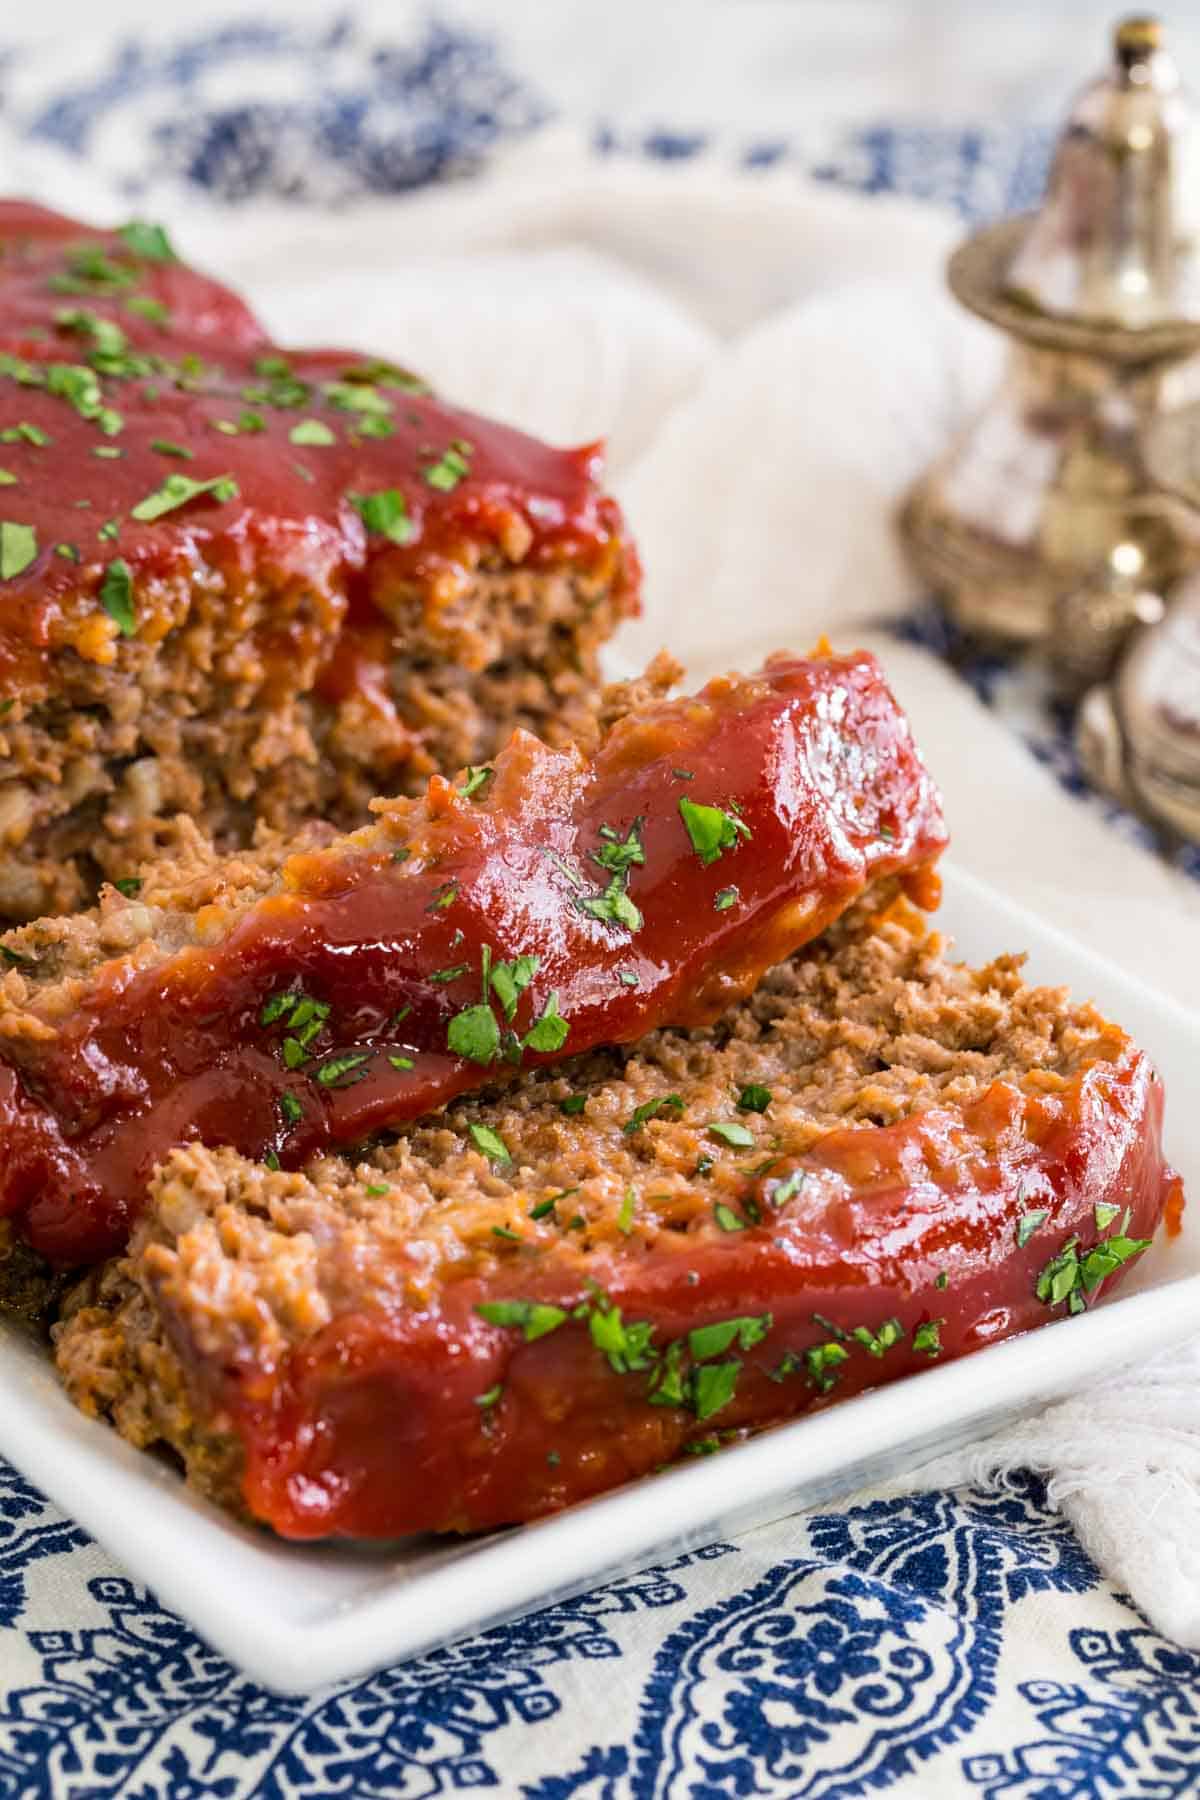 Gluten-free classic meatloaf on a plate, cut into slices.